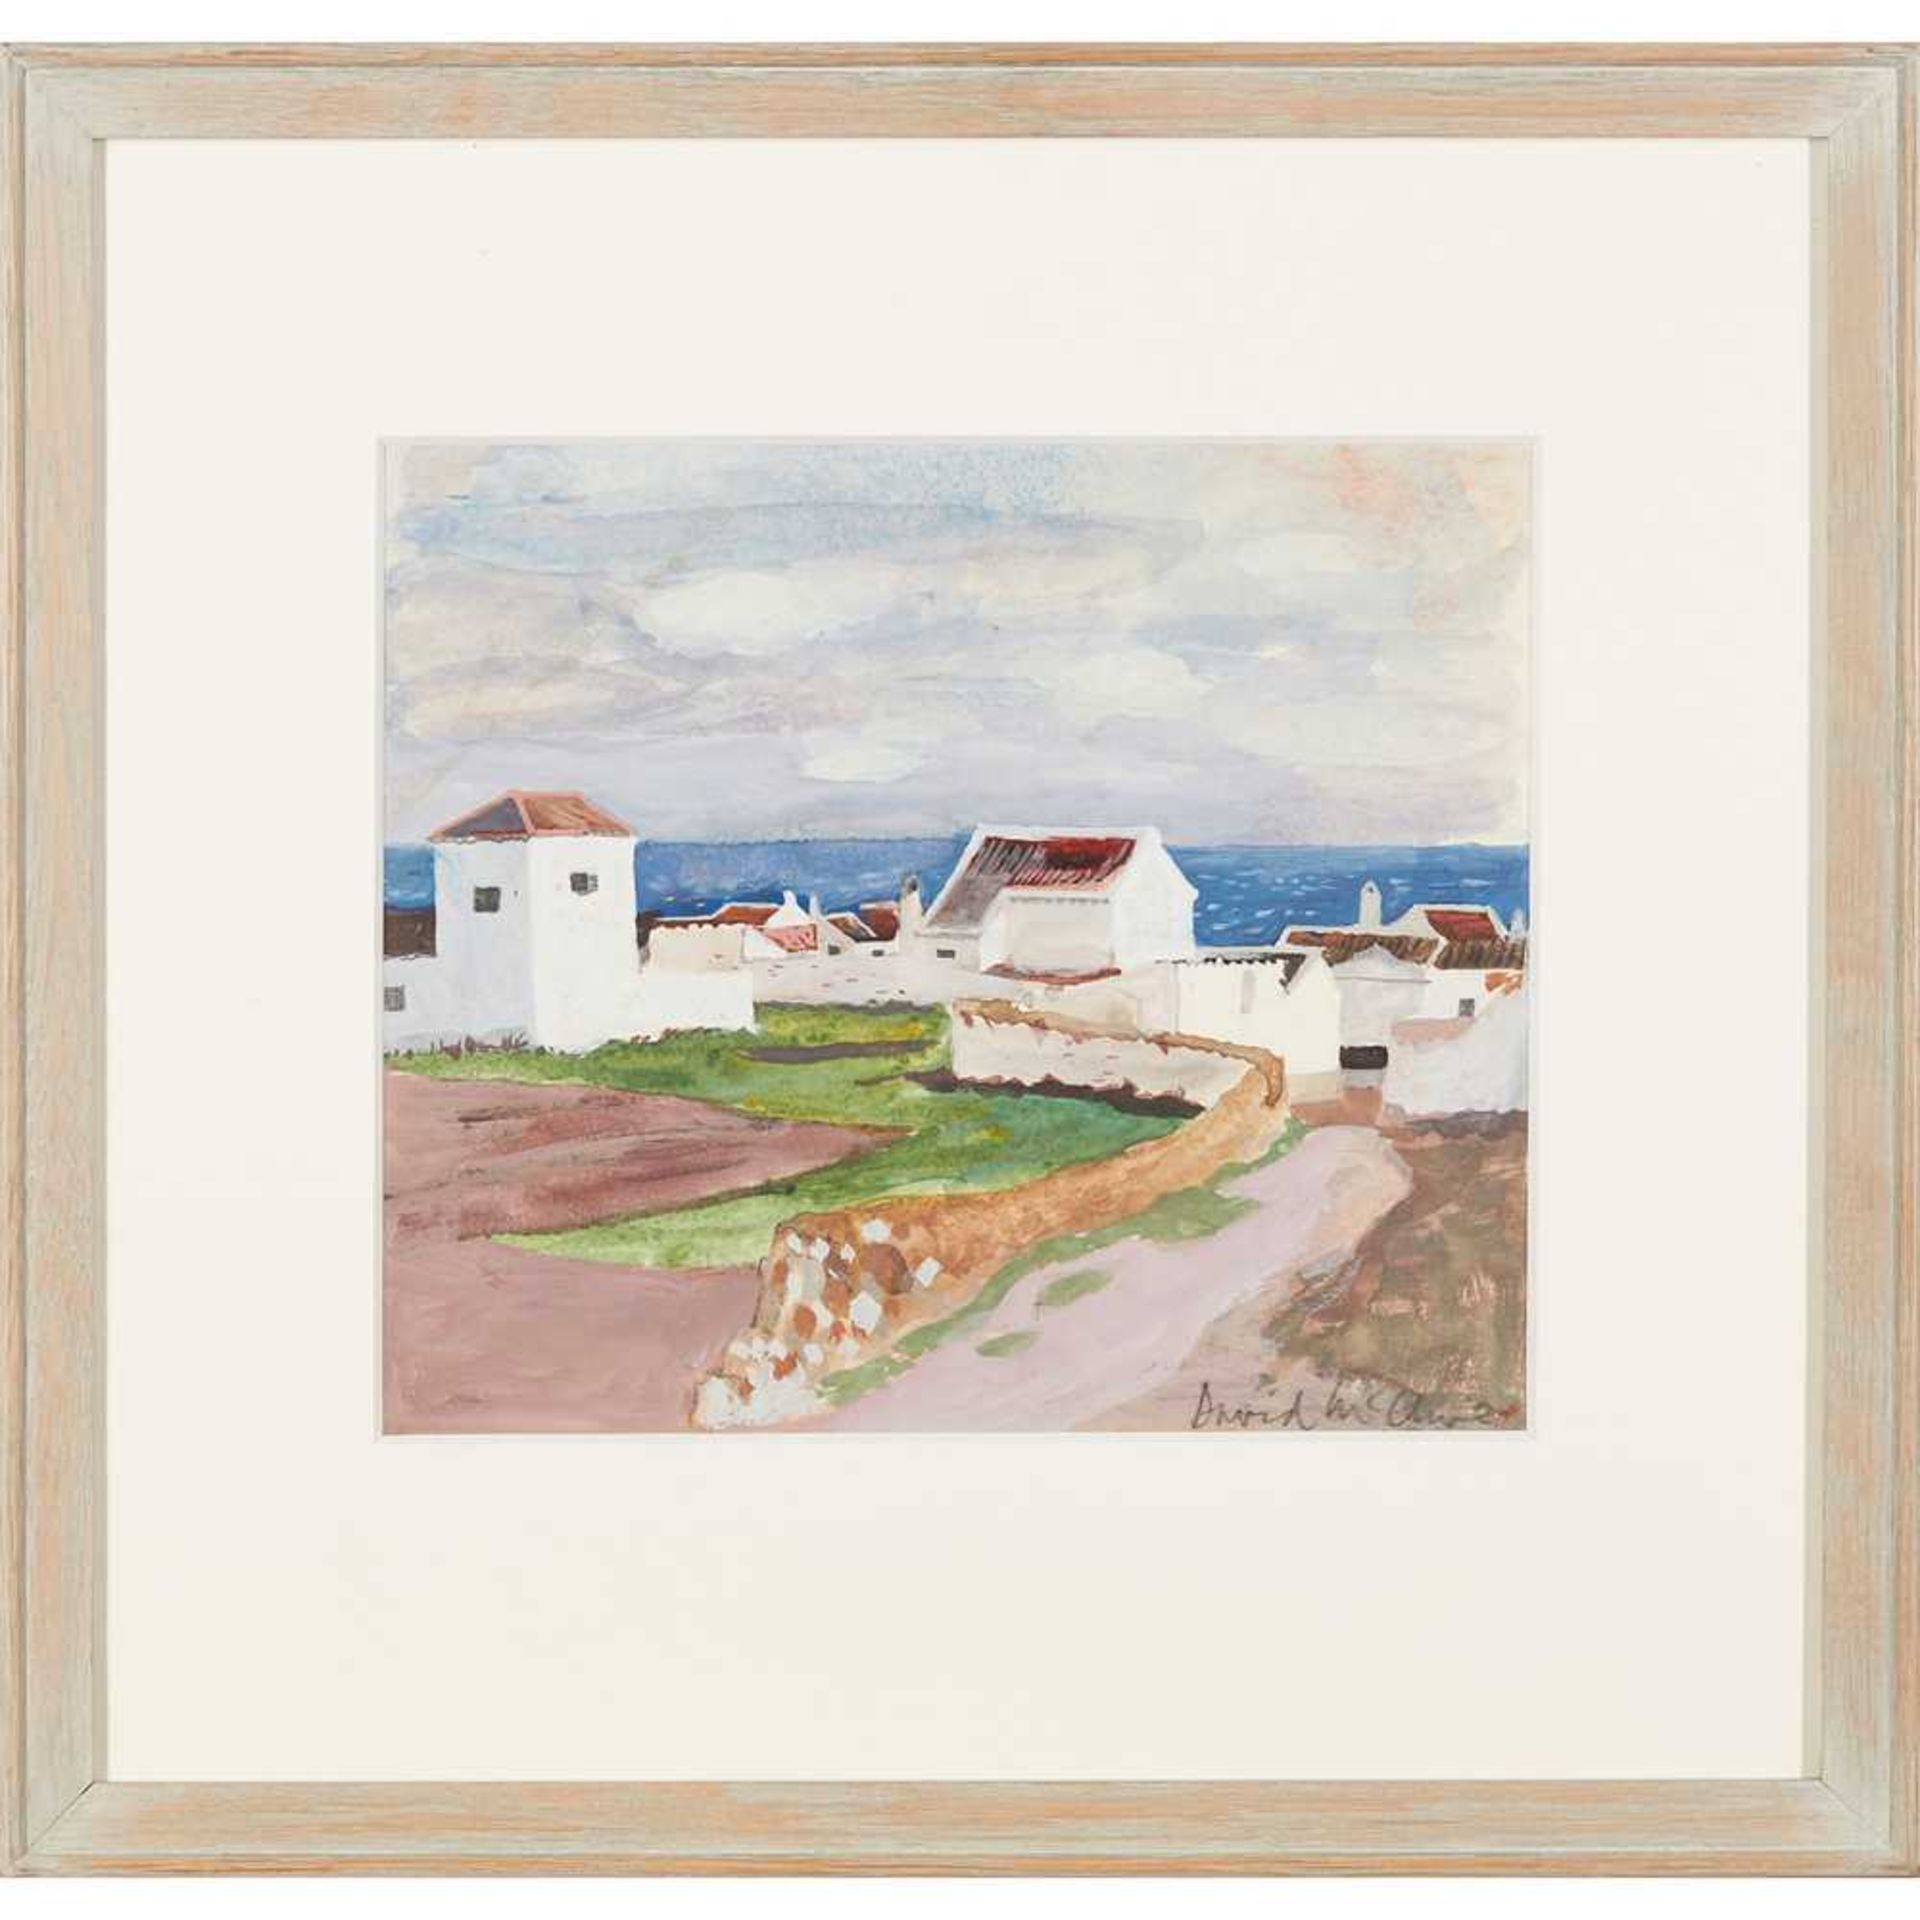 § DAVID MCCLURE R.S.A., R.S.W. (SCOTTISH 1926-1998) VILLAGE BY THE SEA, SPAIN - Image 3 of 6